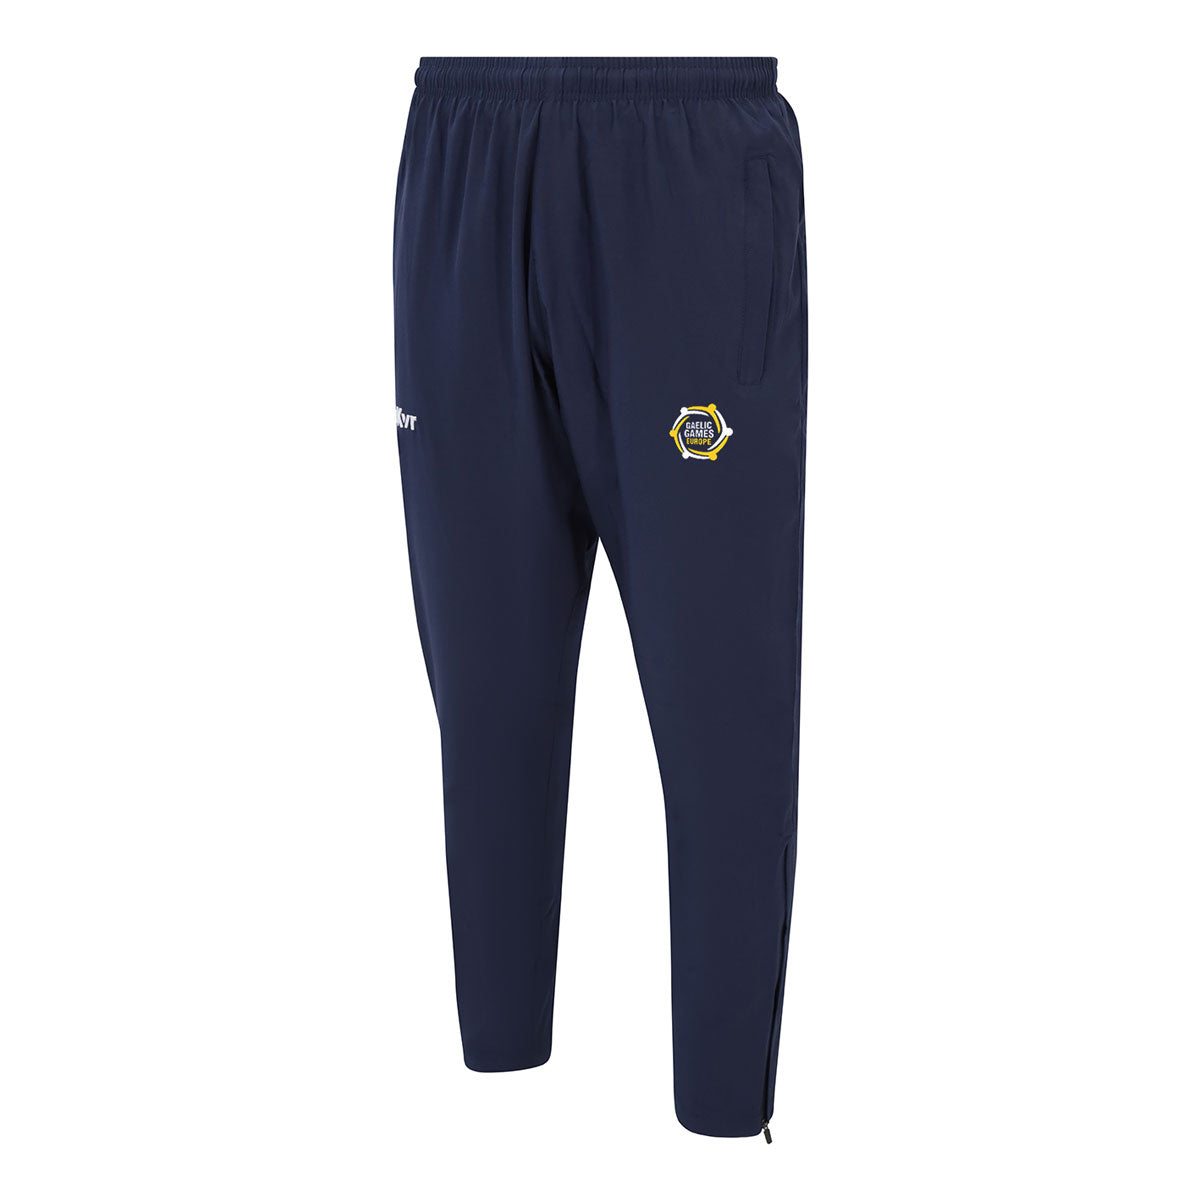 Mc Keever Gaelic Games Europe Core 22 Tapered Pants - Adult - Navy